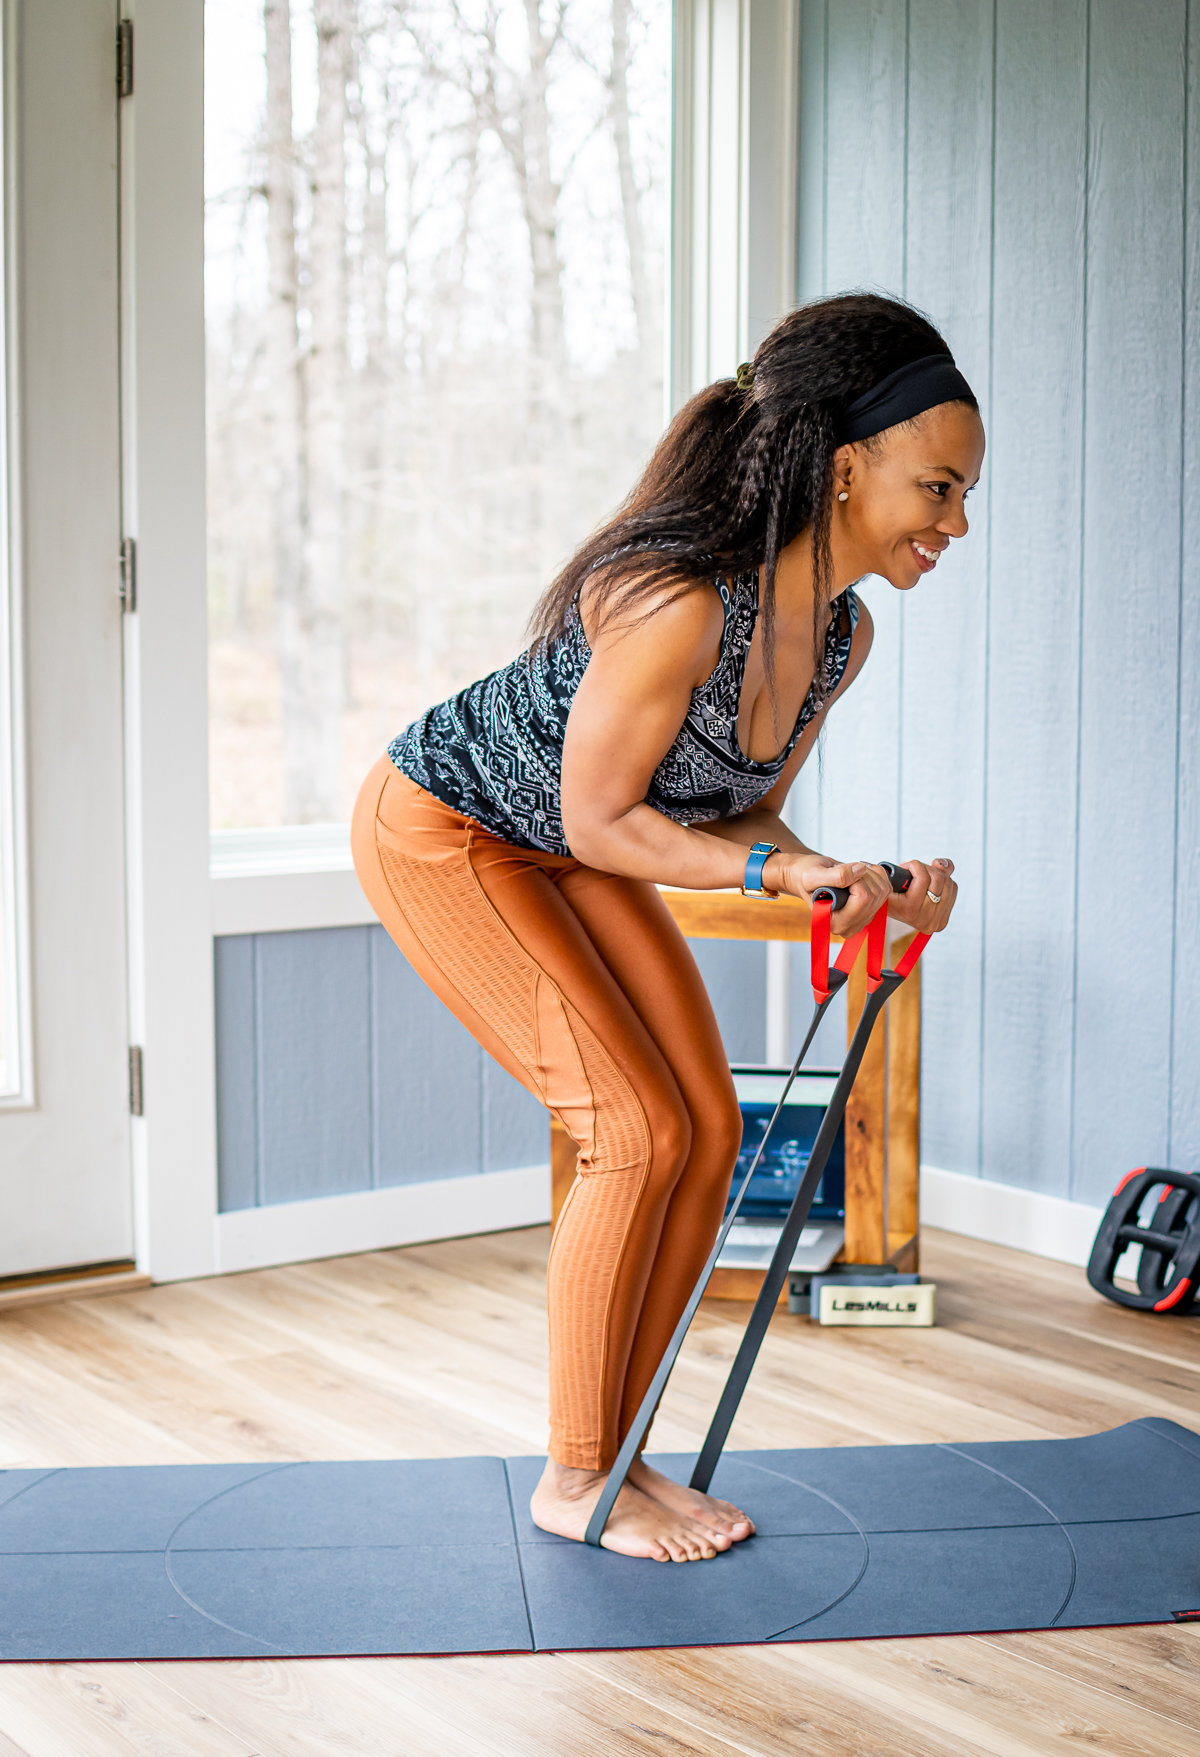 Gifts For The Fit Mom: How To Get In Shape With These 25 Inspiring Products